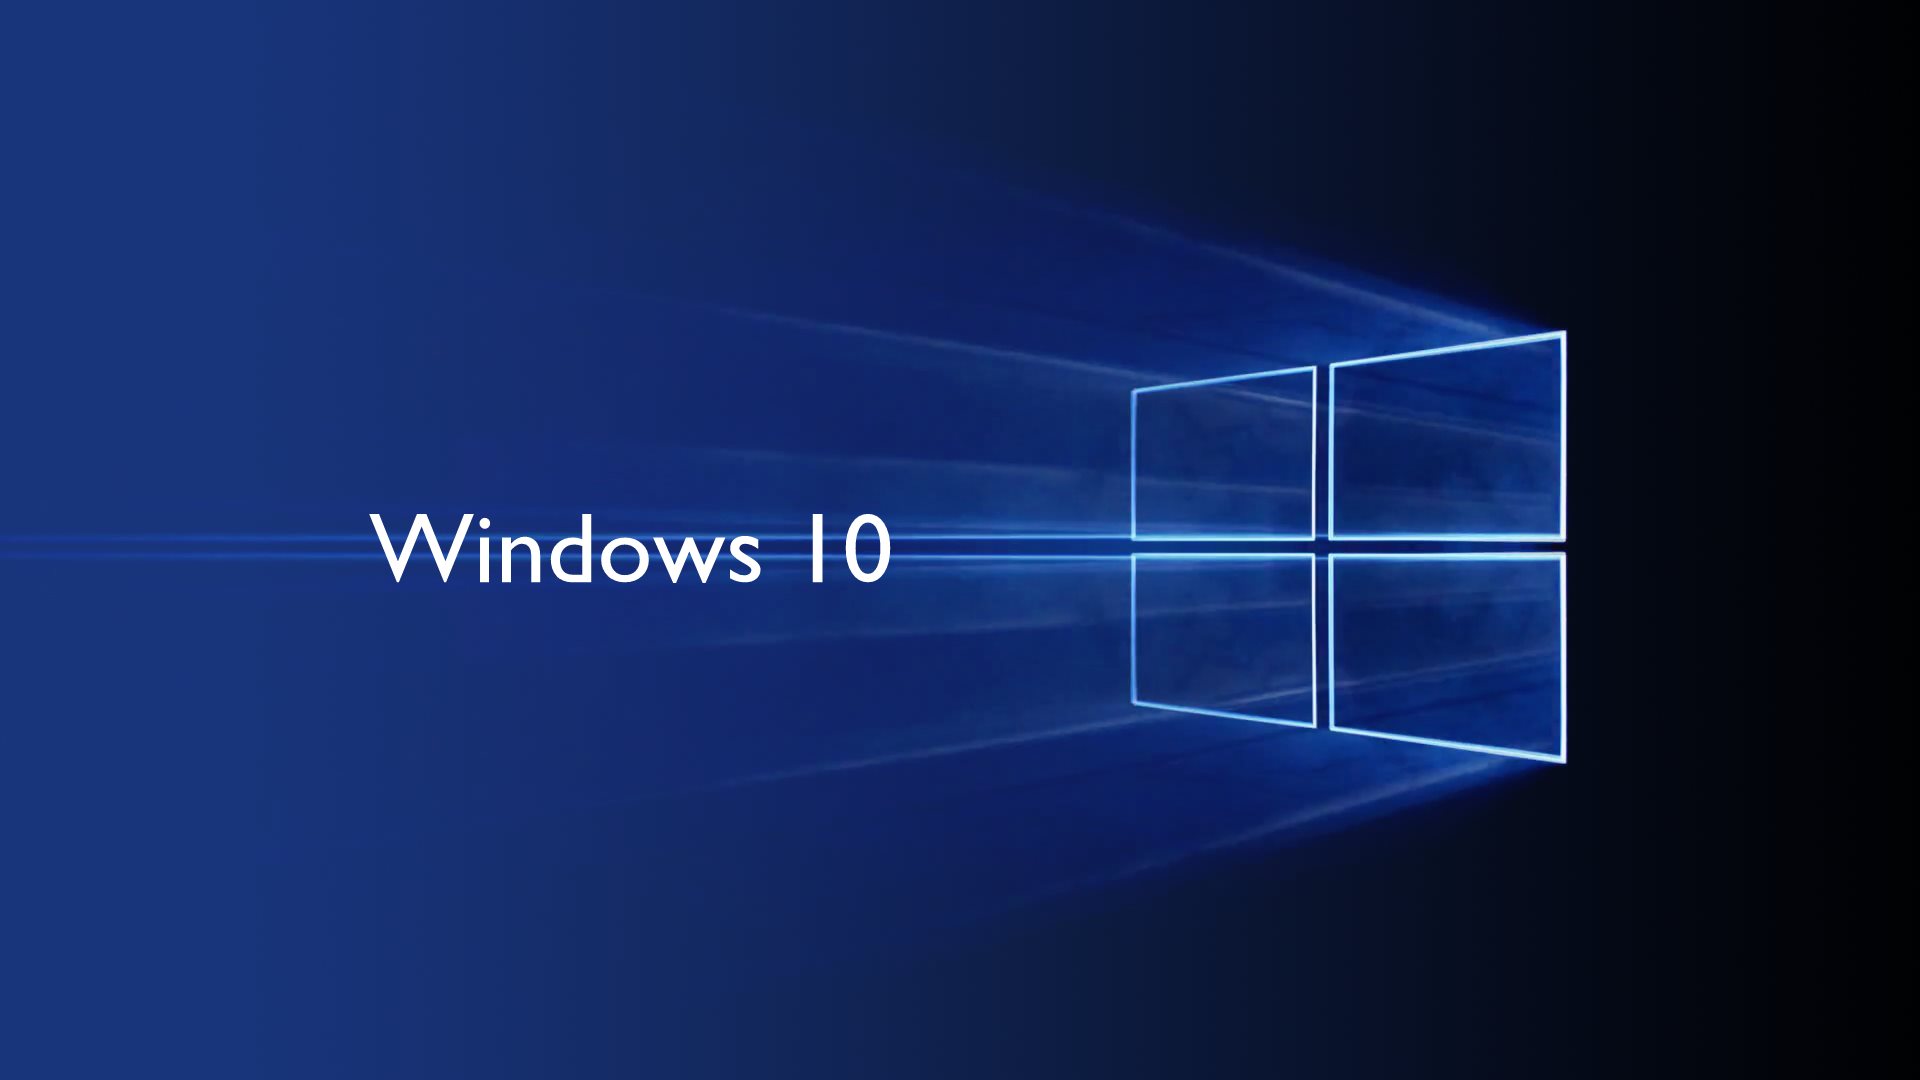 Steps To Take Before Selling Your Windows 10 PC